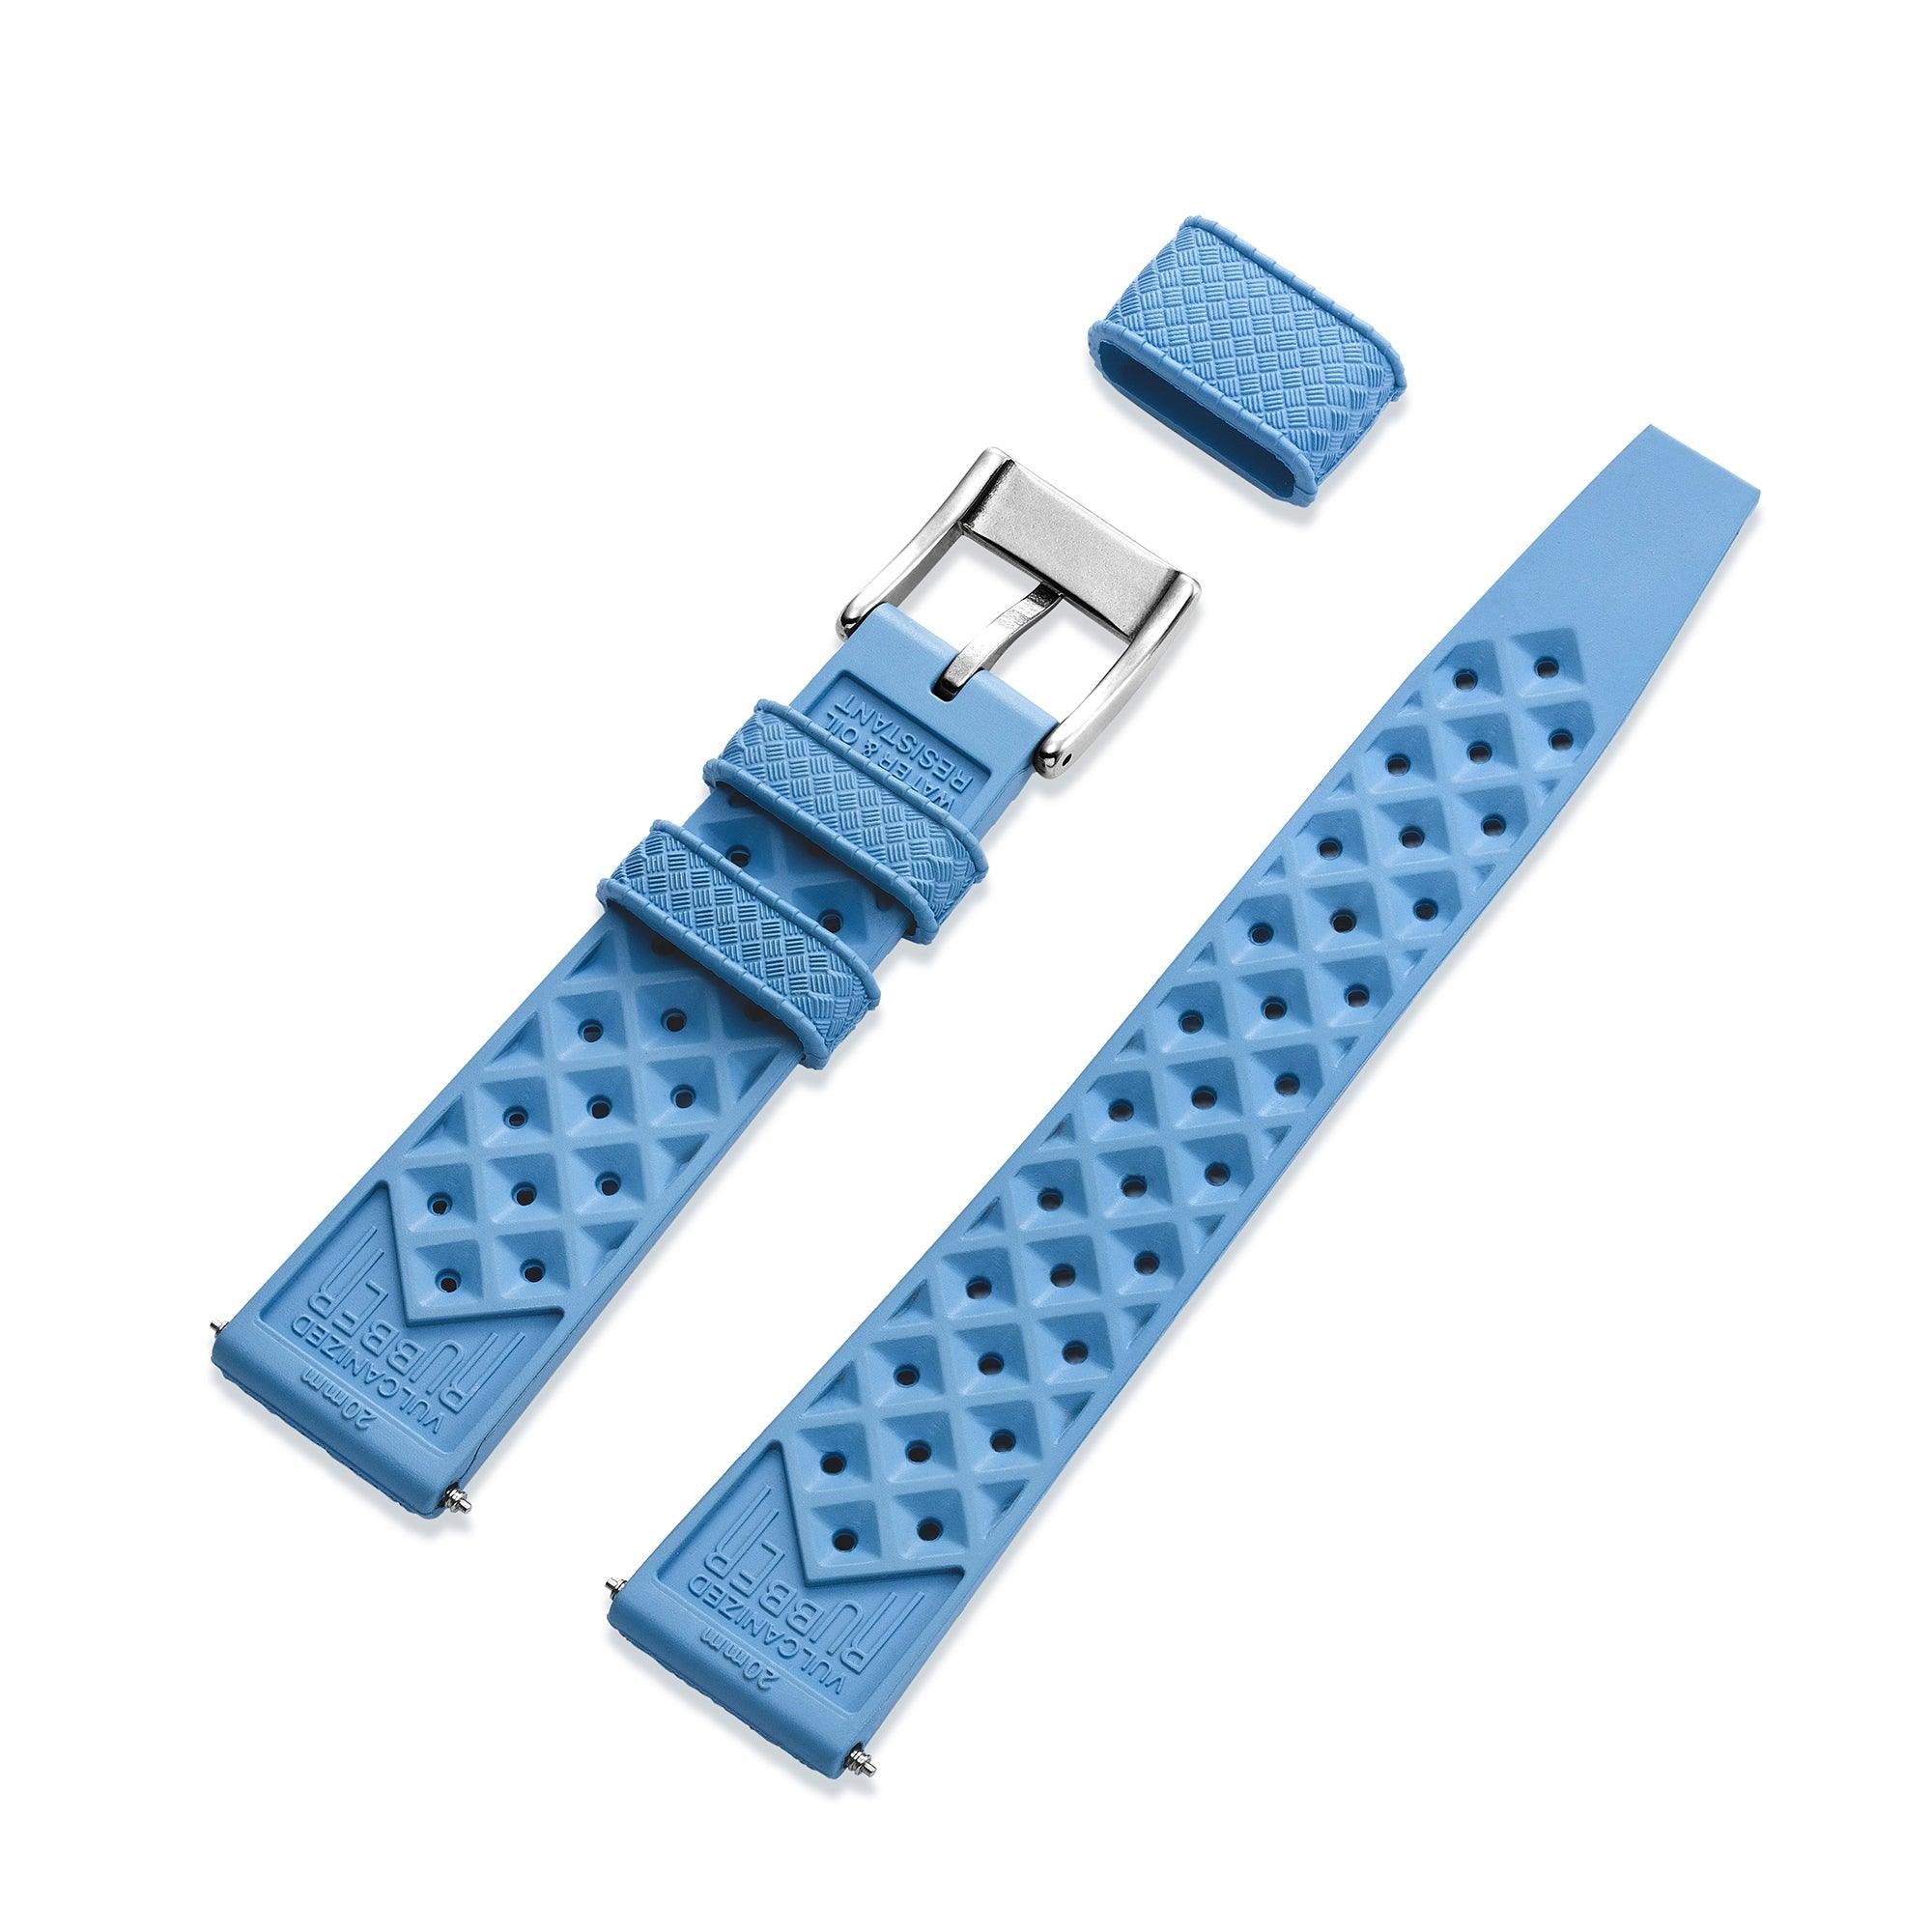 10 Reasons Why Rubber B is the Ultimate Watch Band Replacement Solution